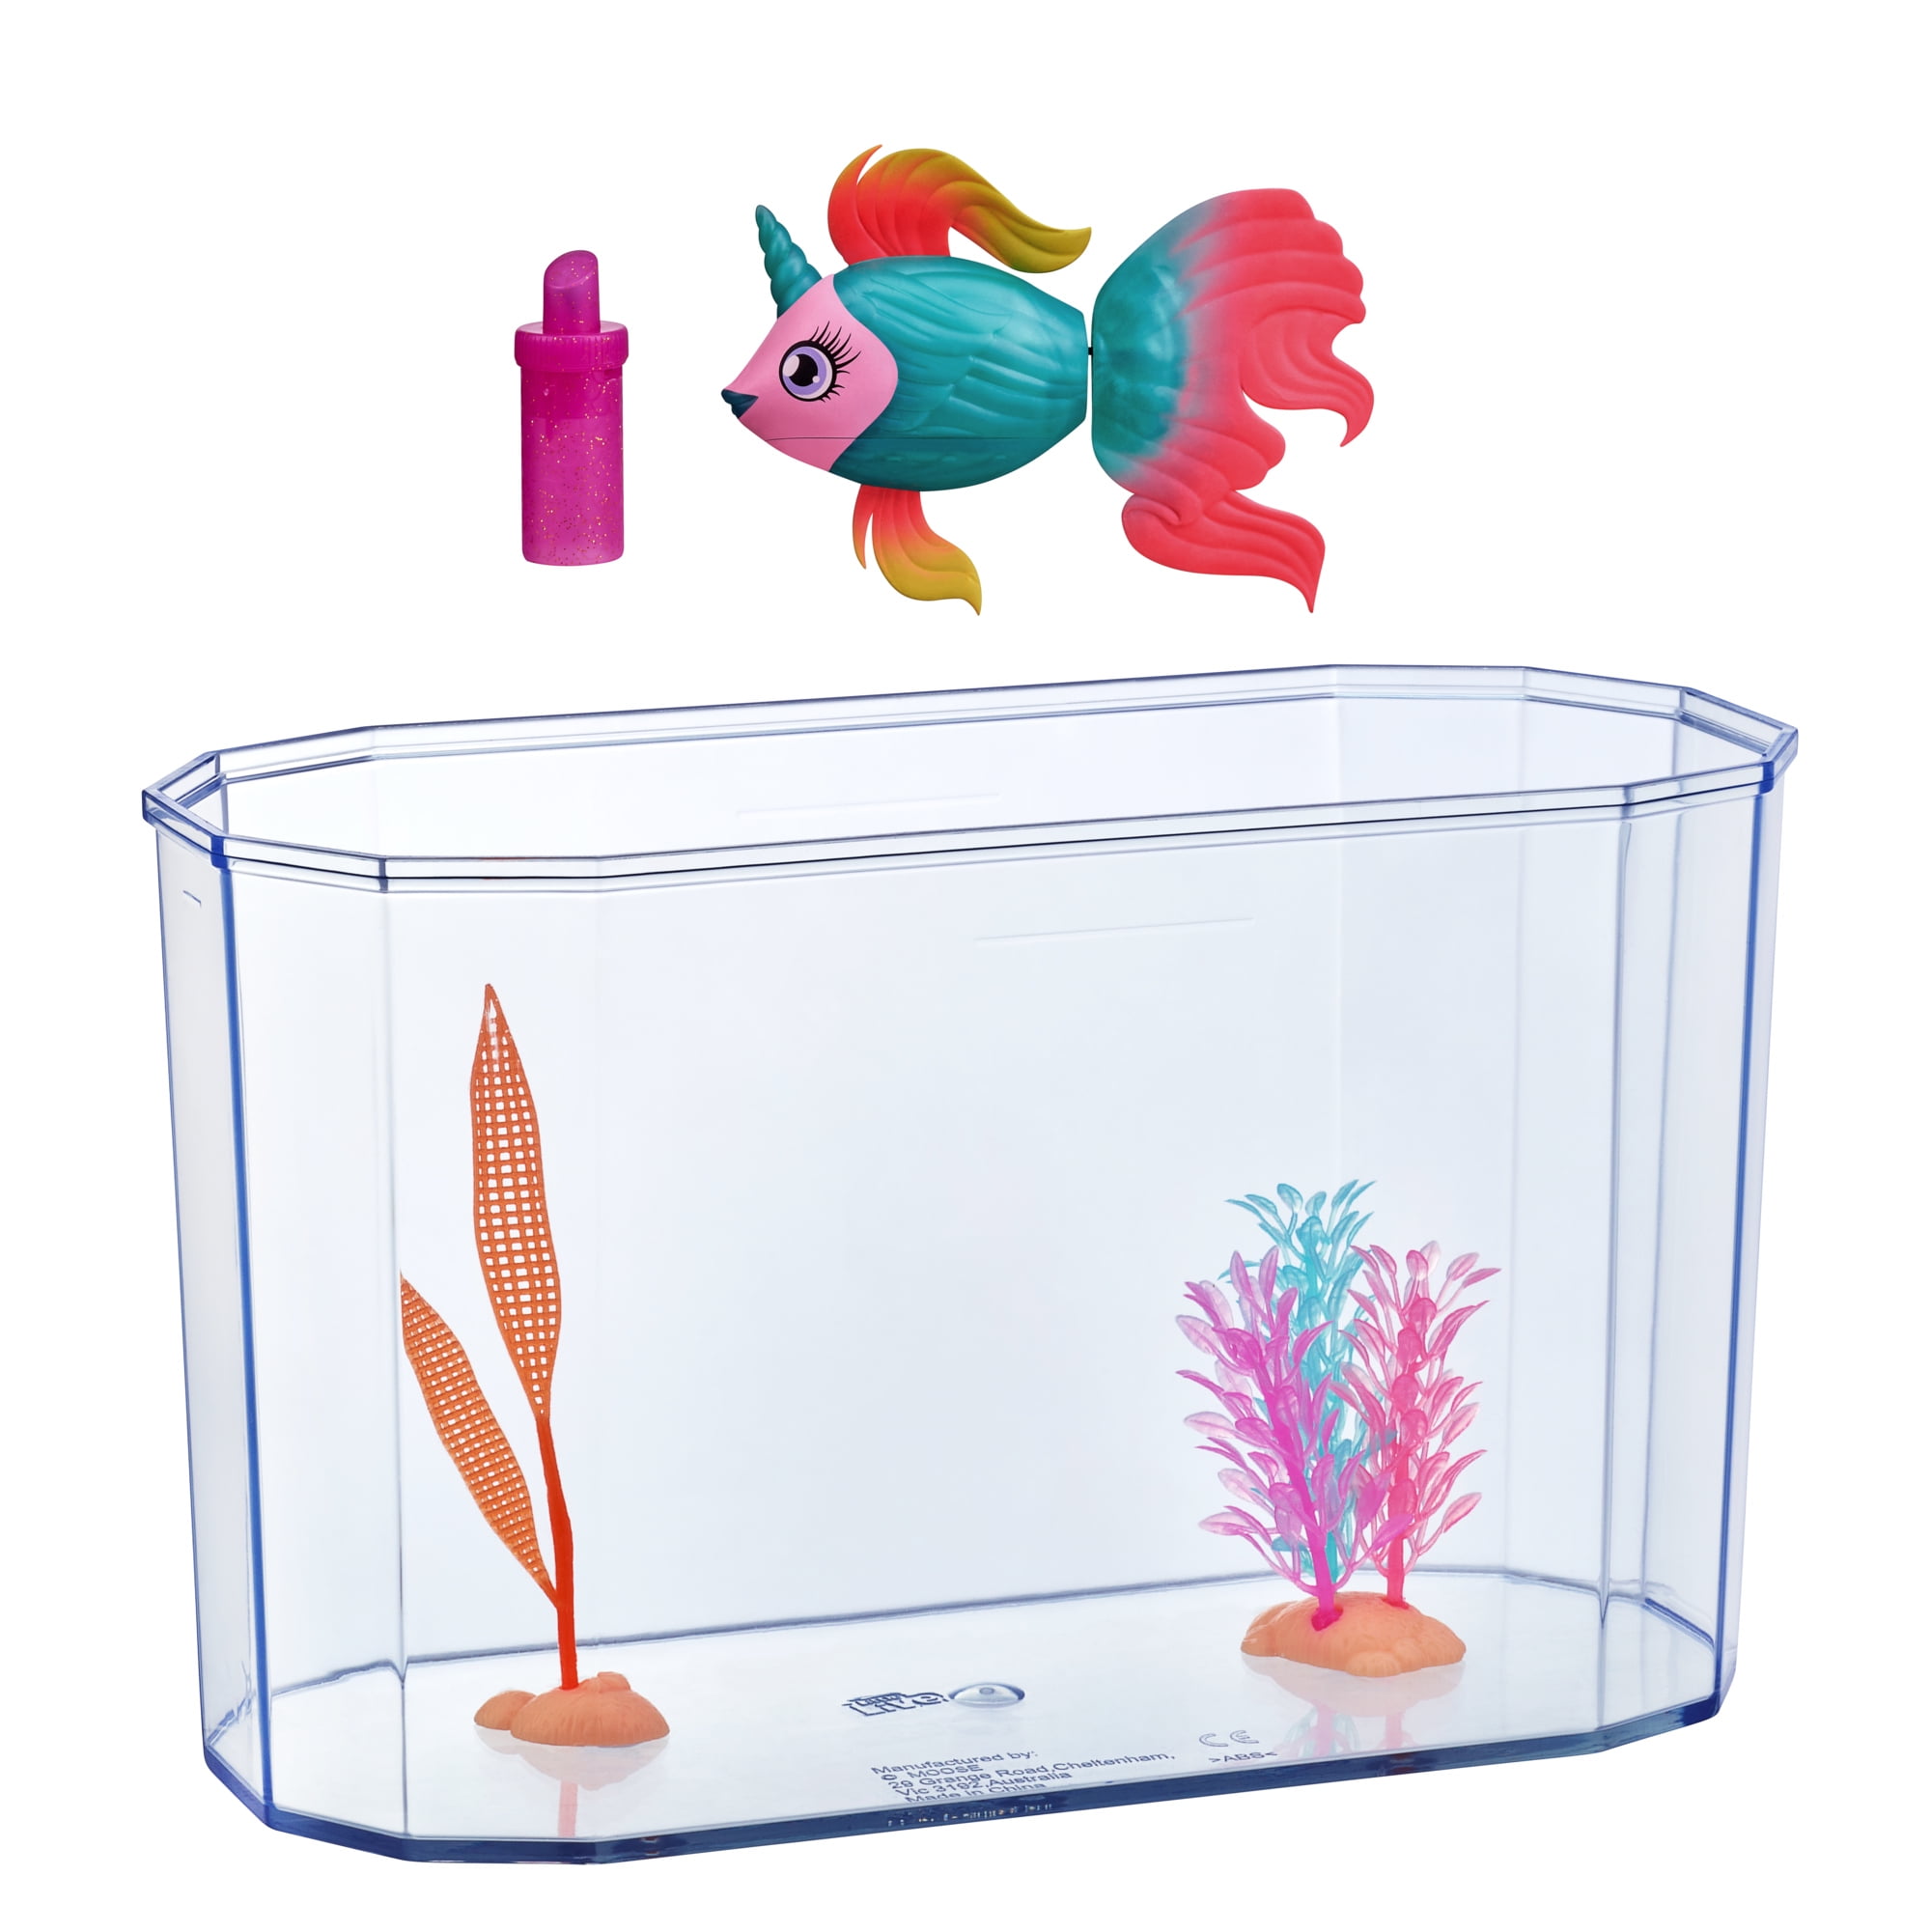 Little Live Pets, Lil' Dippers Fish and Tank: Fantasea, Interactive Toy Fish & Tank , Magically Comes Alive in Water, Feed and Swims like A Real Fish, Toys for kids, Ages 5+